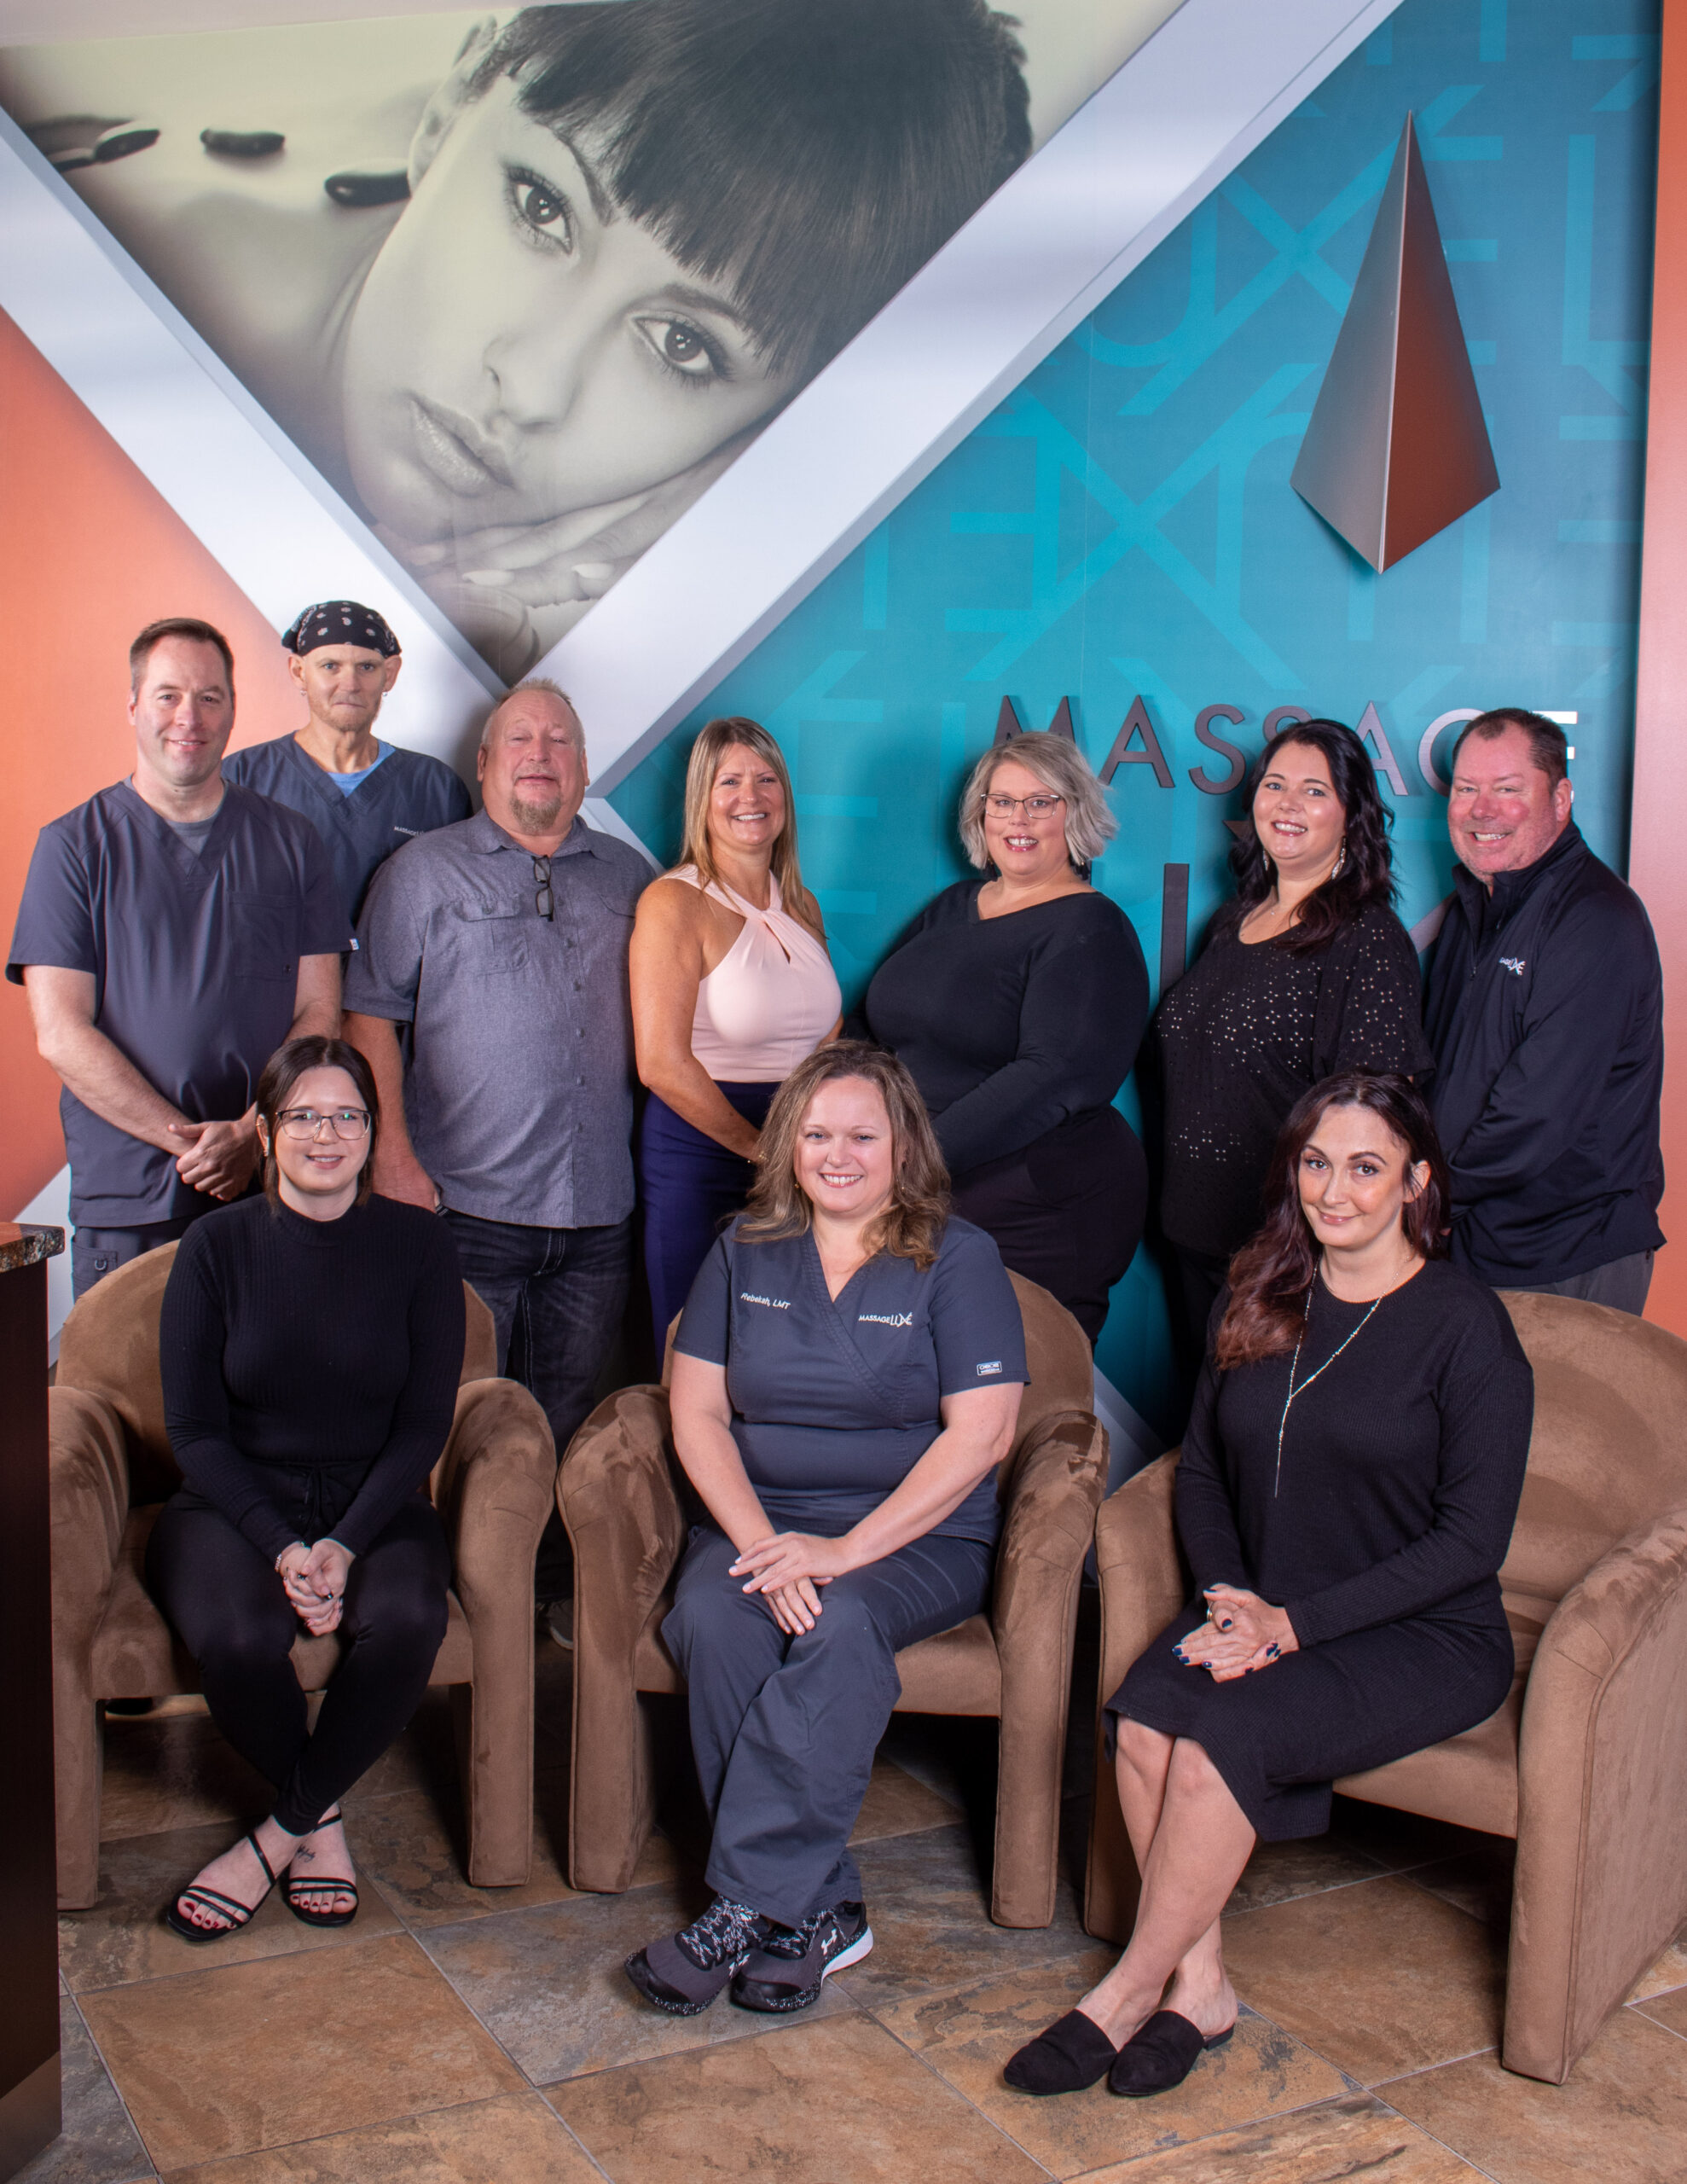 MassageLuXe Highlights Long-Time Friends and Business Partners in Columbia, Missouri